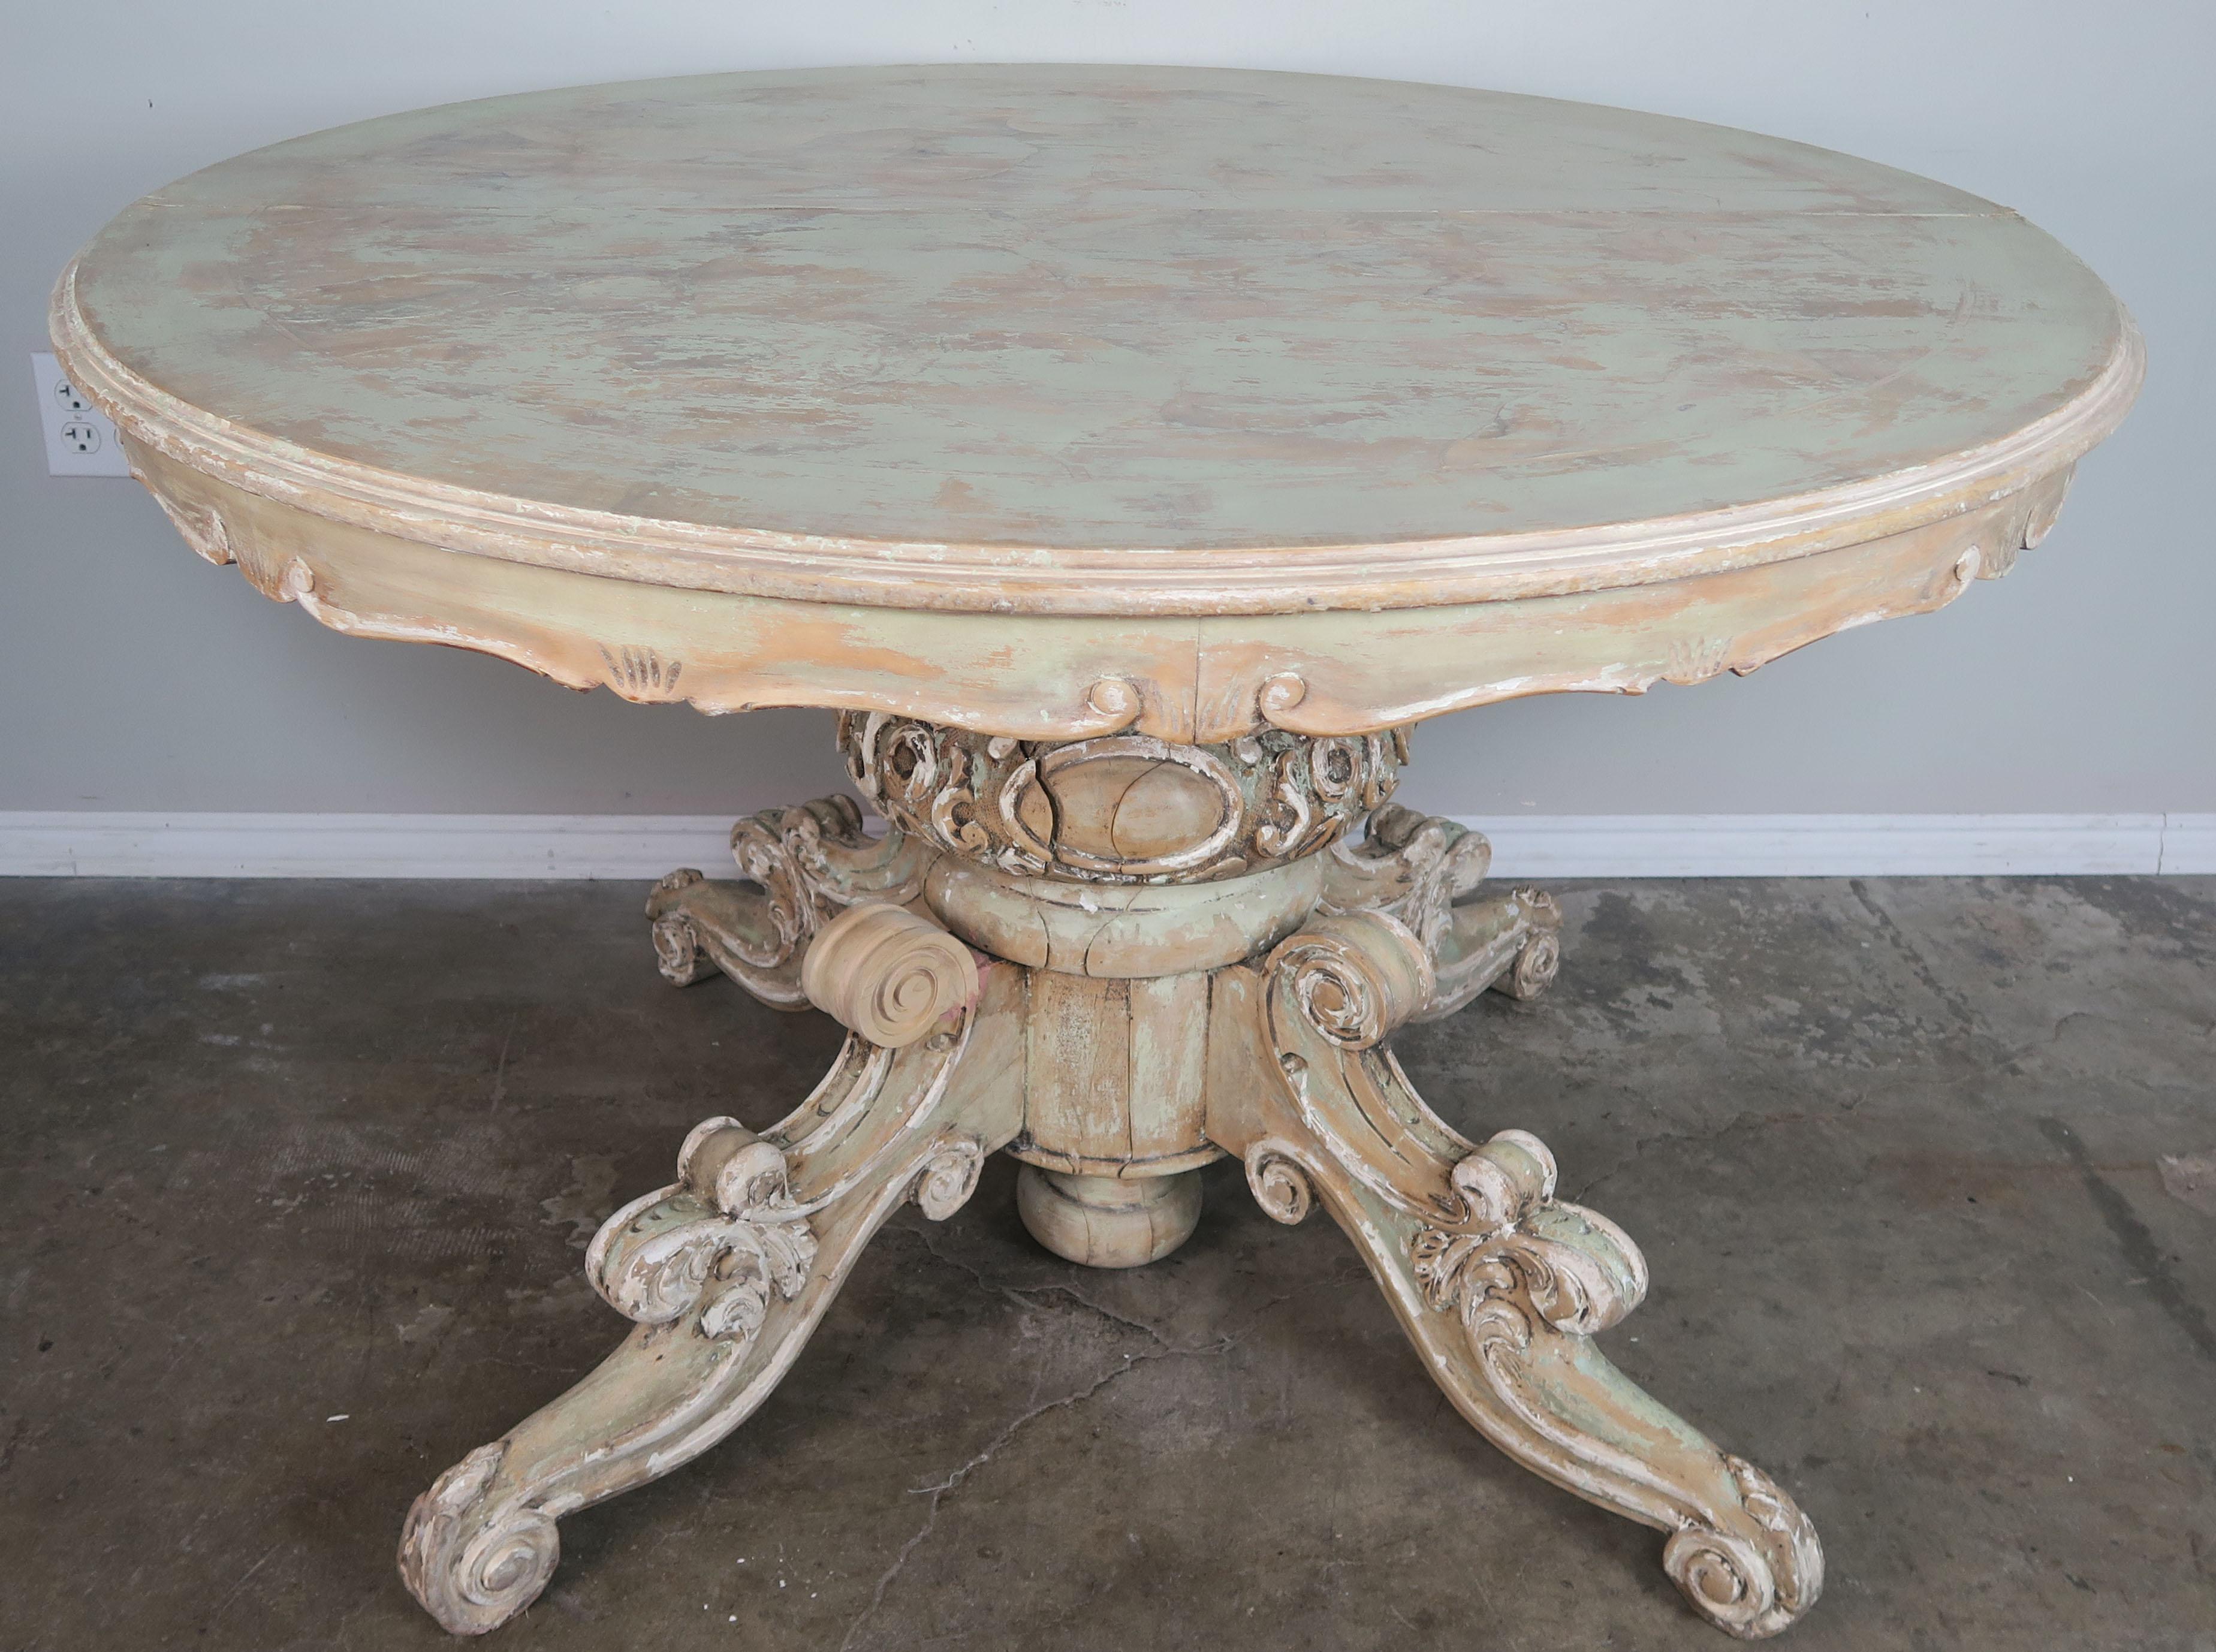 1930s French carved wood Louis XV pedestal dining table. Beautiful distressed finish with remnants of paint throughout. Scalloped apron and beautifully carved center that extends into four carved scrolled legs. Perfect for a small dining room or